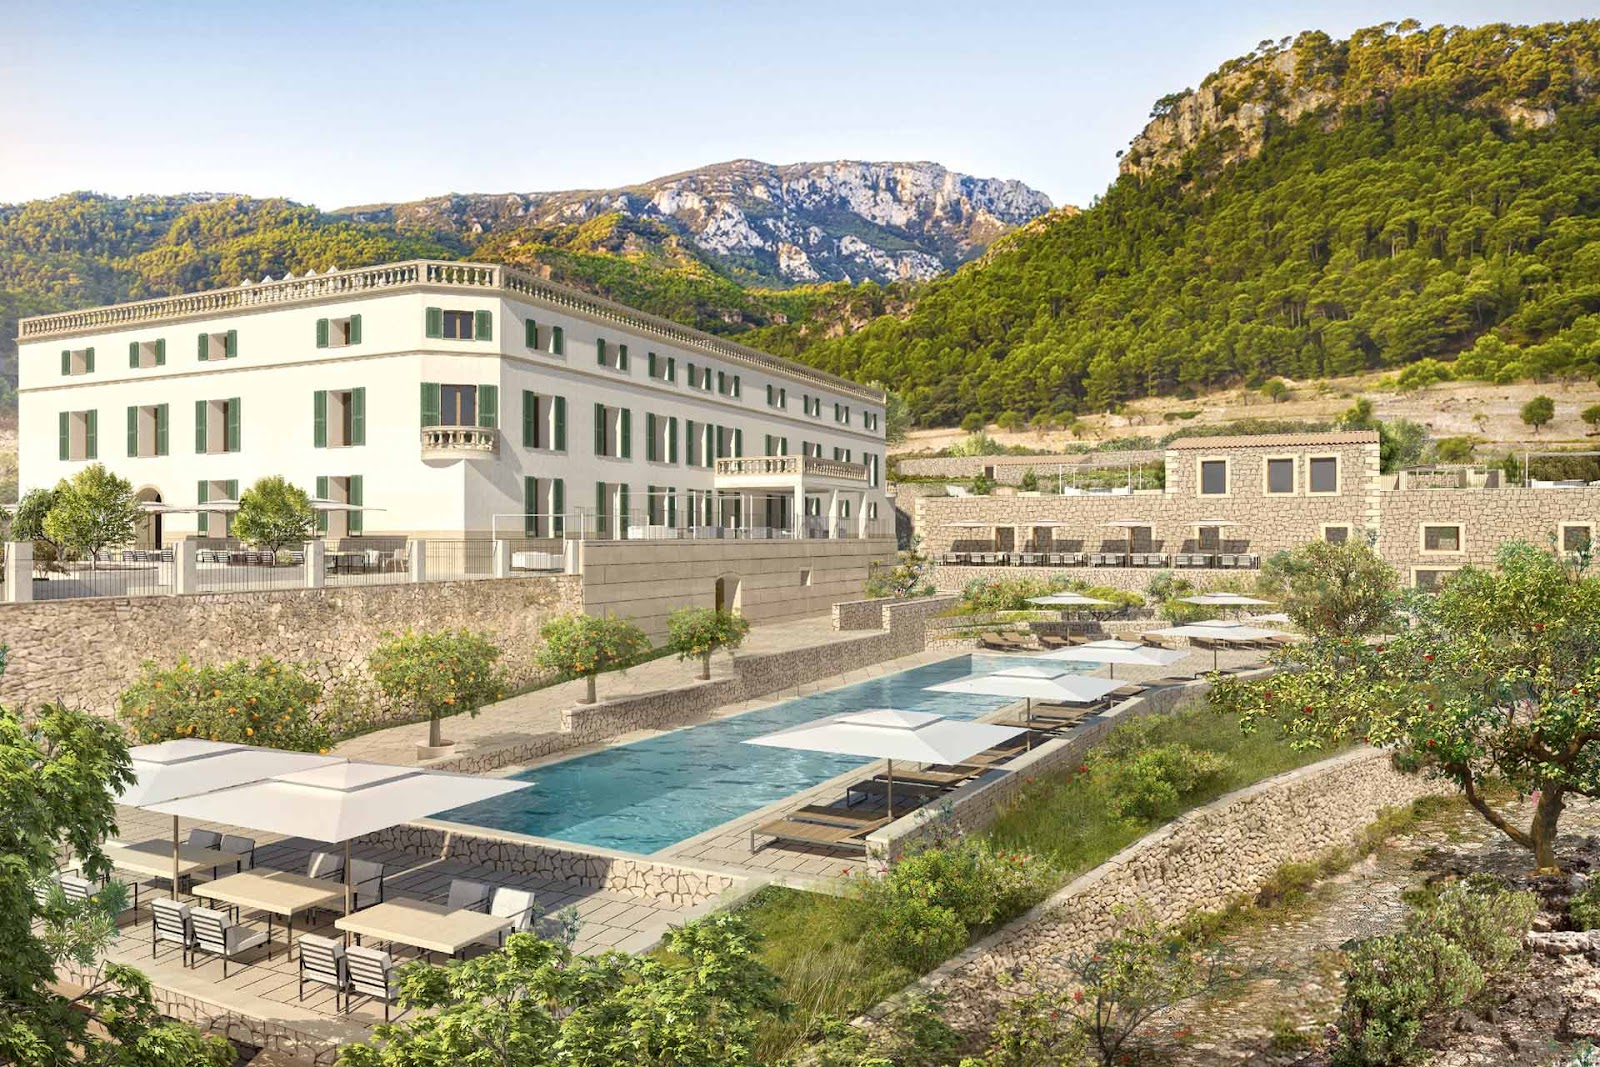 A list of new hotels 2023 opening in Europe, all boutique hotels with stylish decor and pools.